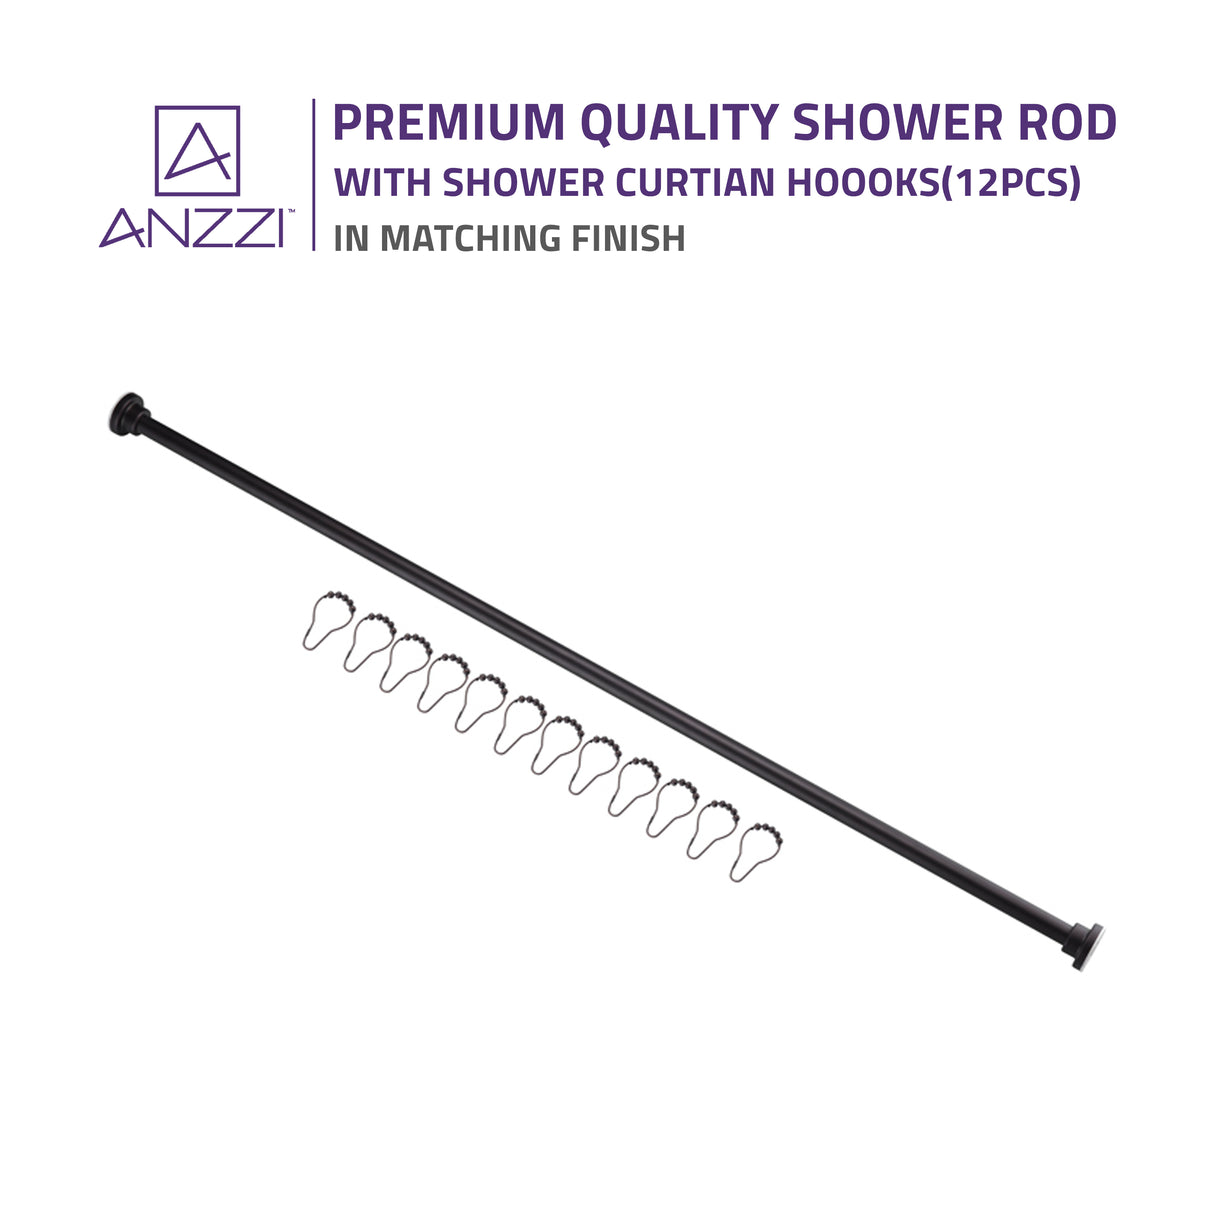 ANZZI AC-AZSR88ORB 48-88 Inches Shower Curtain Rod with Shower Hooks in Oil Rubbed Bronze | Adjustable Tension Shower Doorway Curtain Rod | Rust Resistant No Drilling Anti-Slip Bar for Bathroom | AC-AZSR88ORB